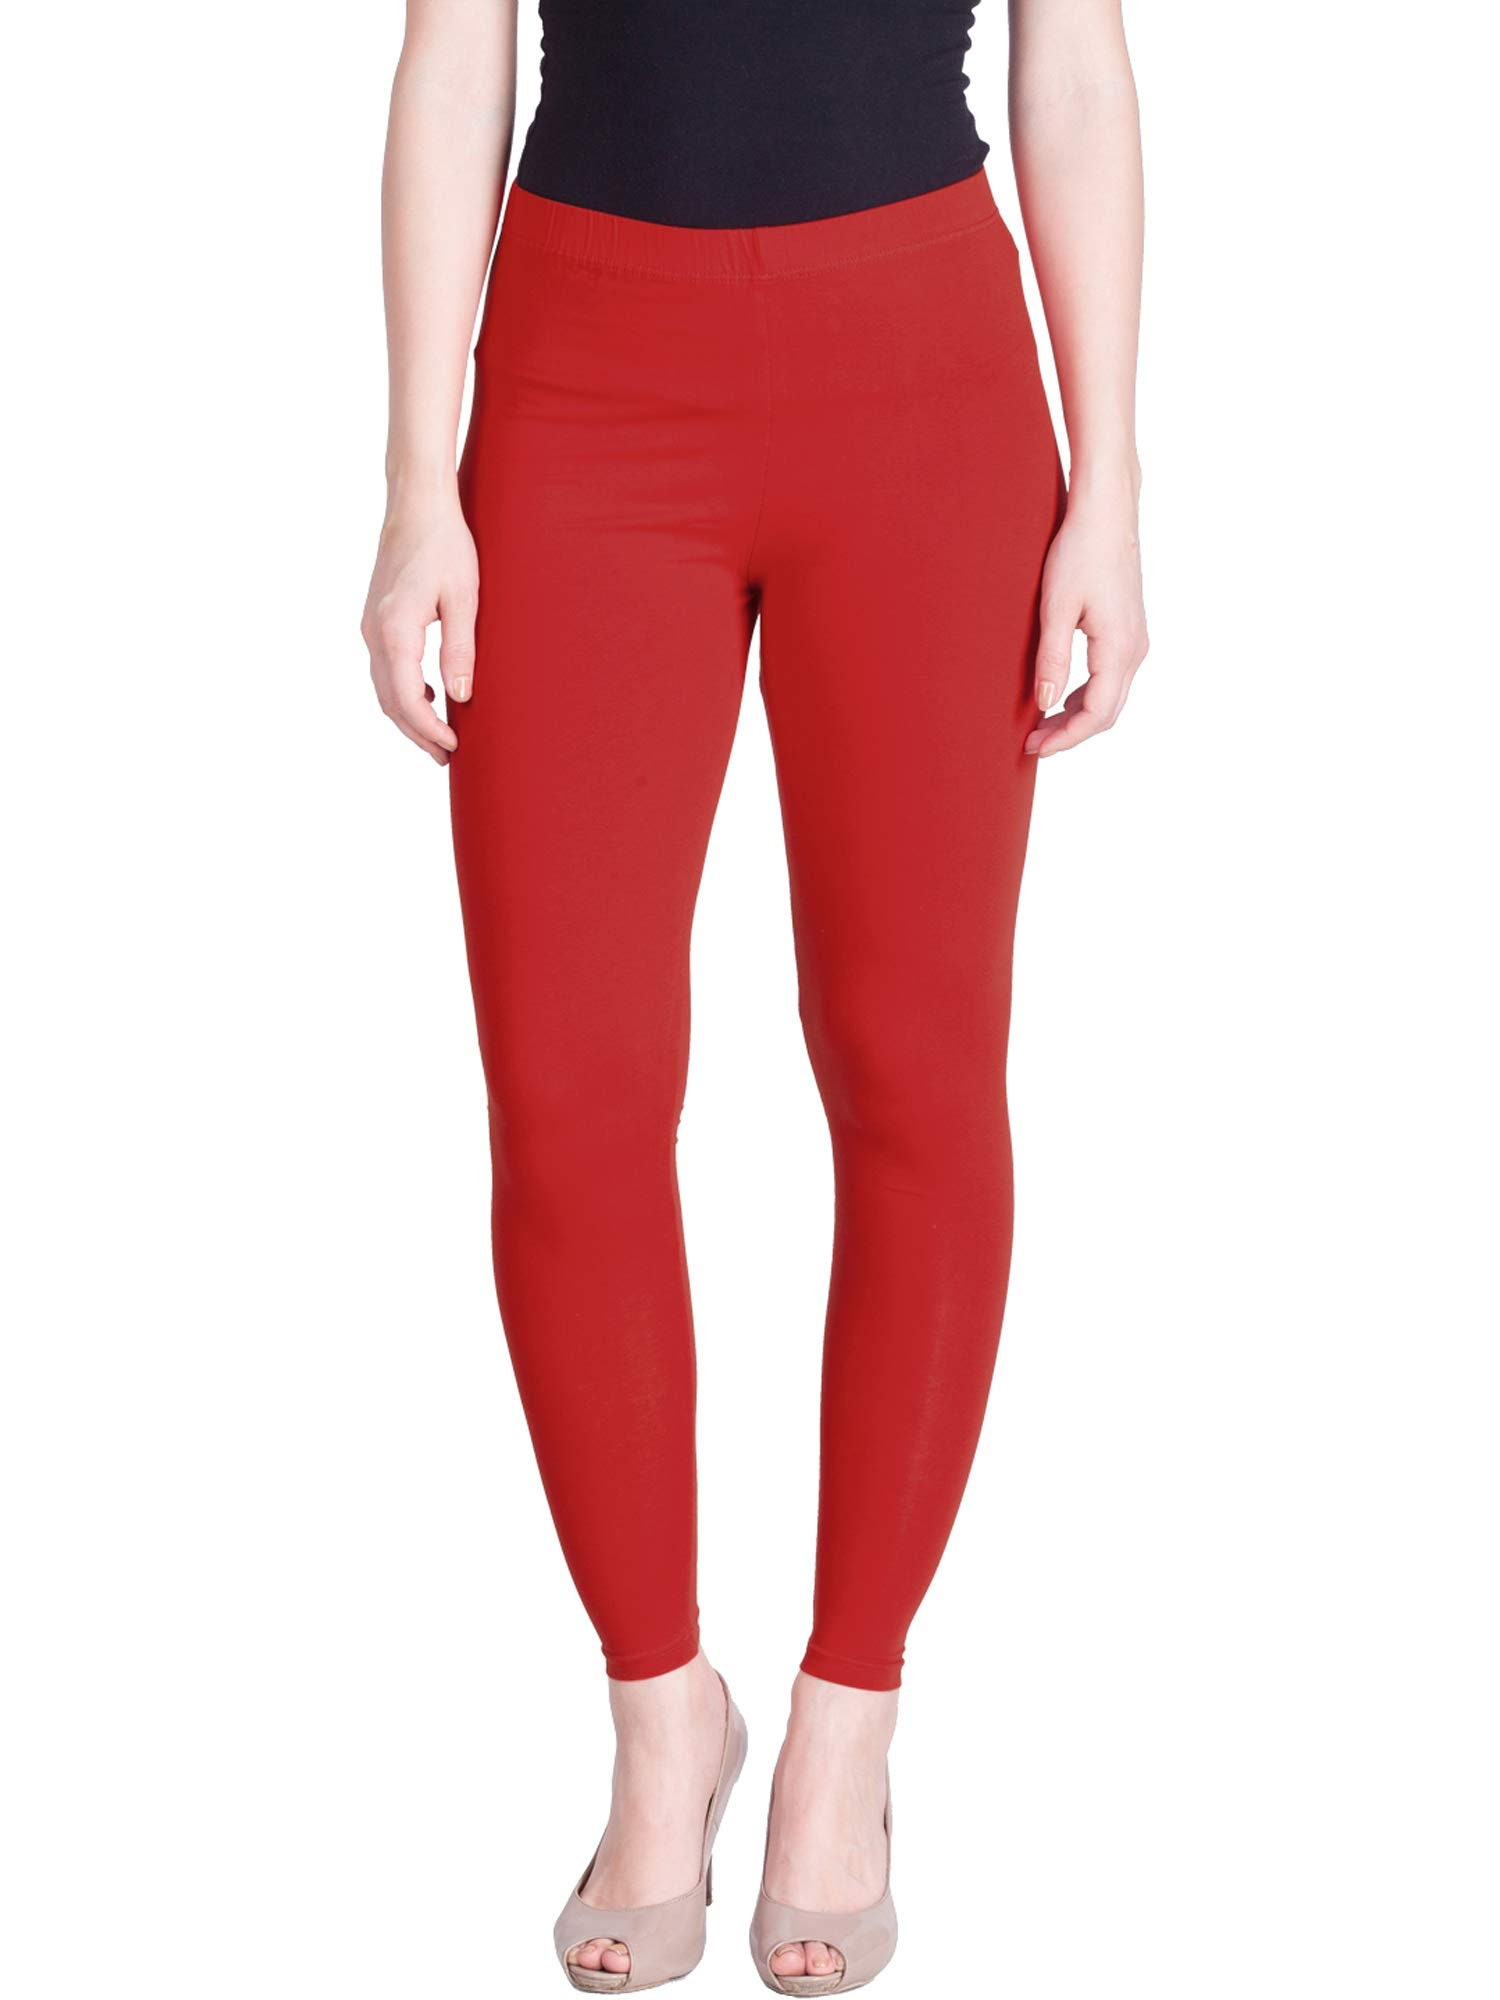 Women Ankle Length Leggings Colors Red Free Size Free Shipping -  Canada